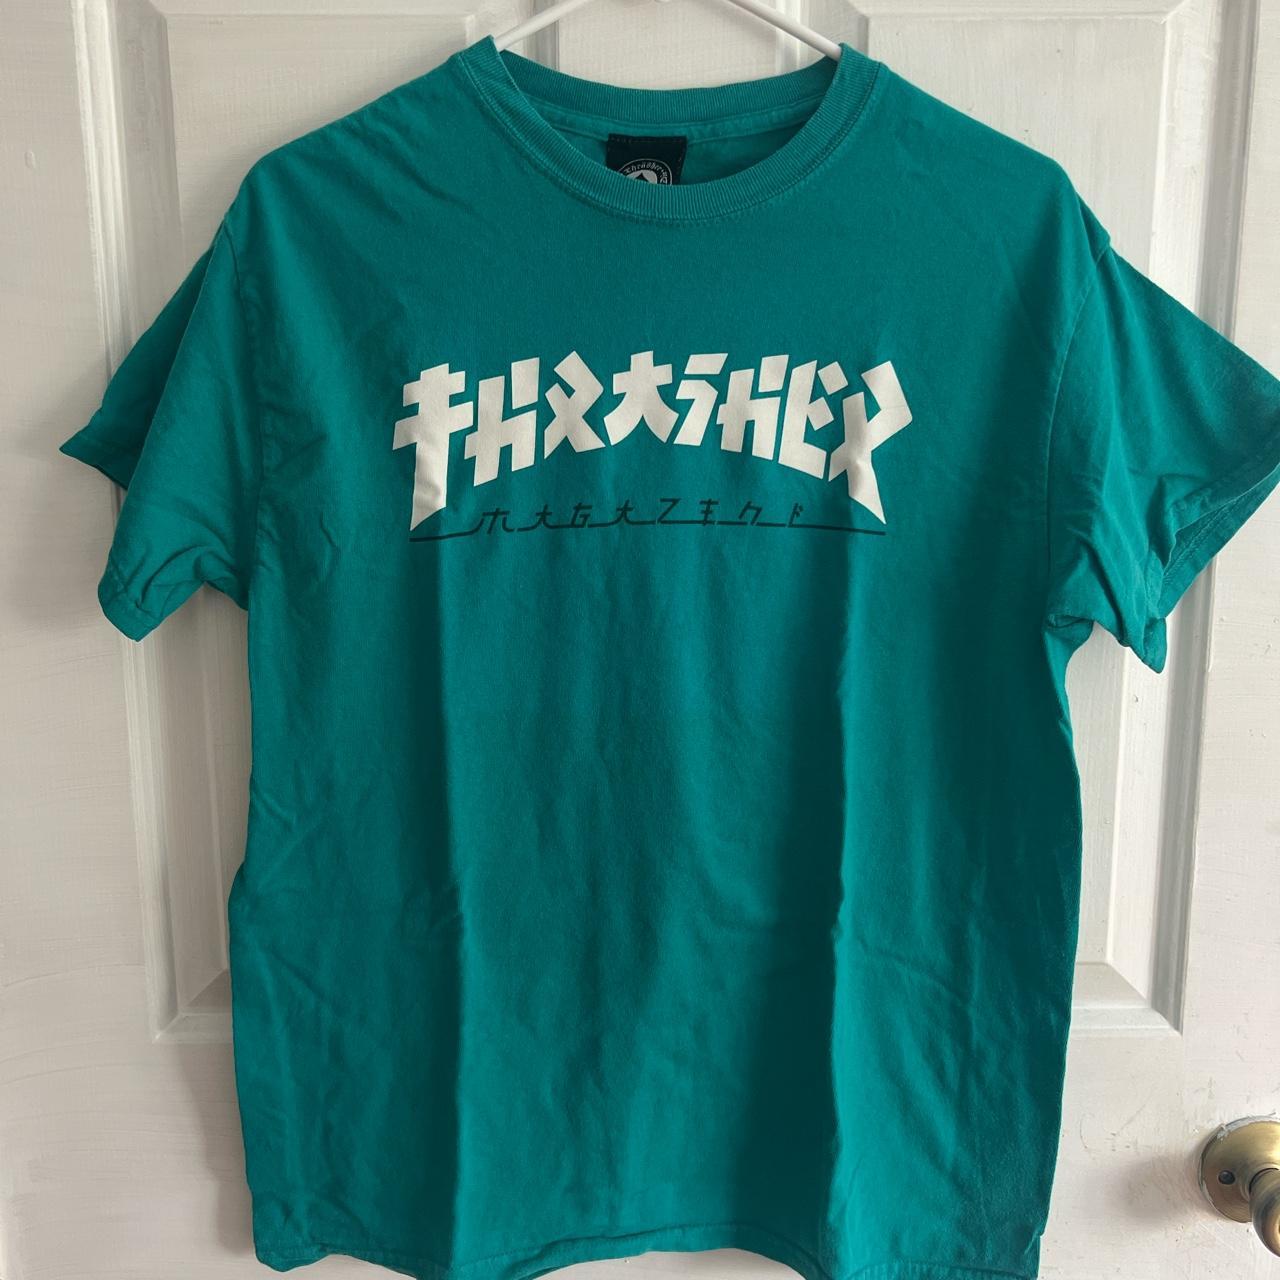 #thrasher #skater shirt! Trying to get rid of this... - Depop